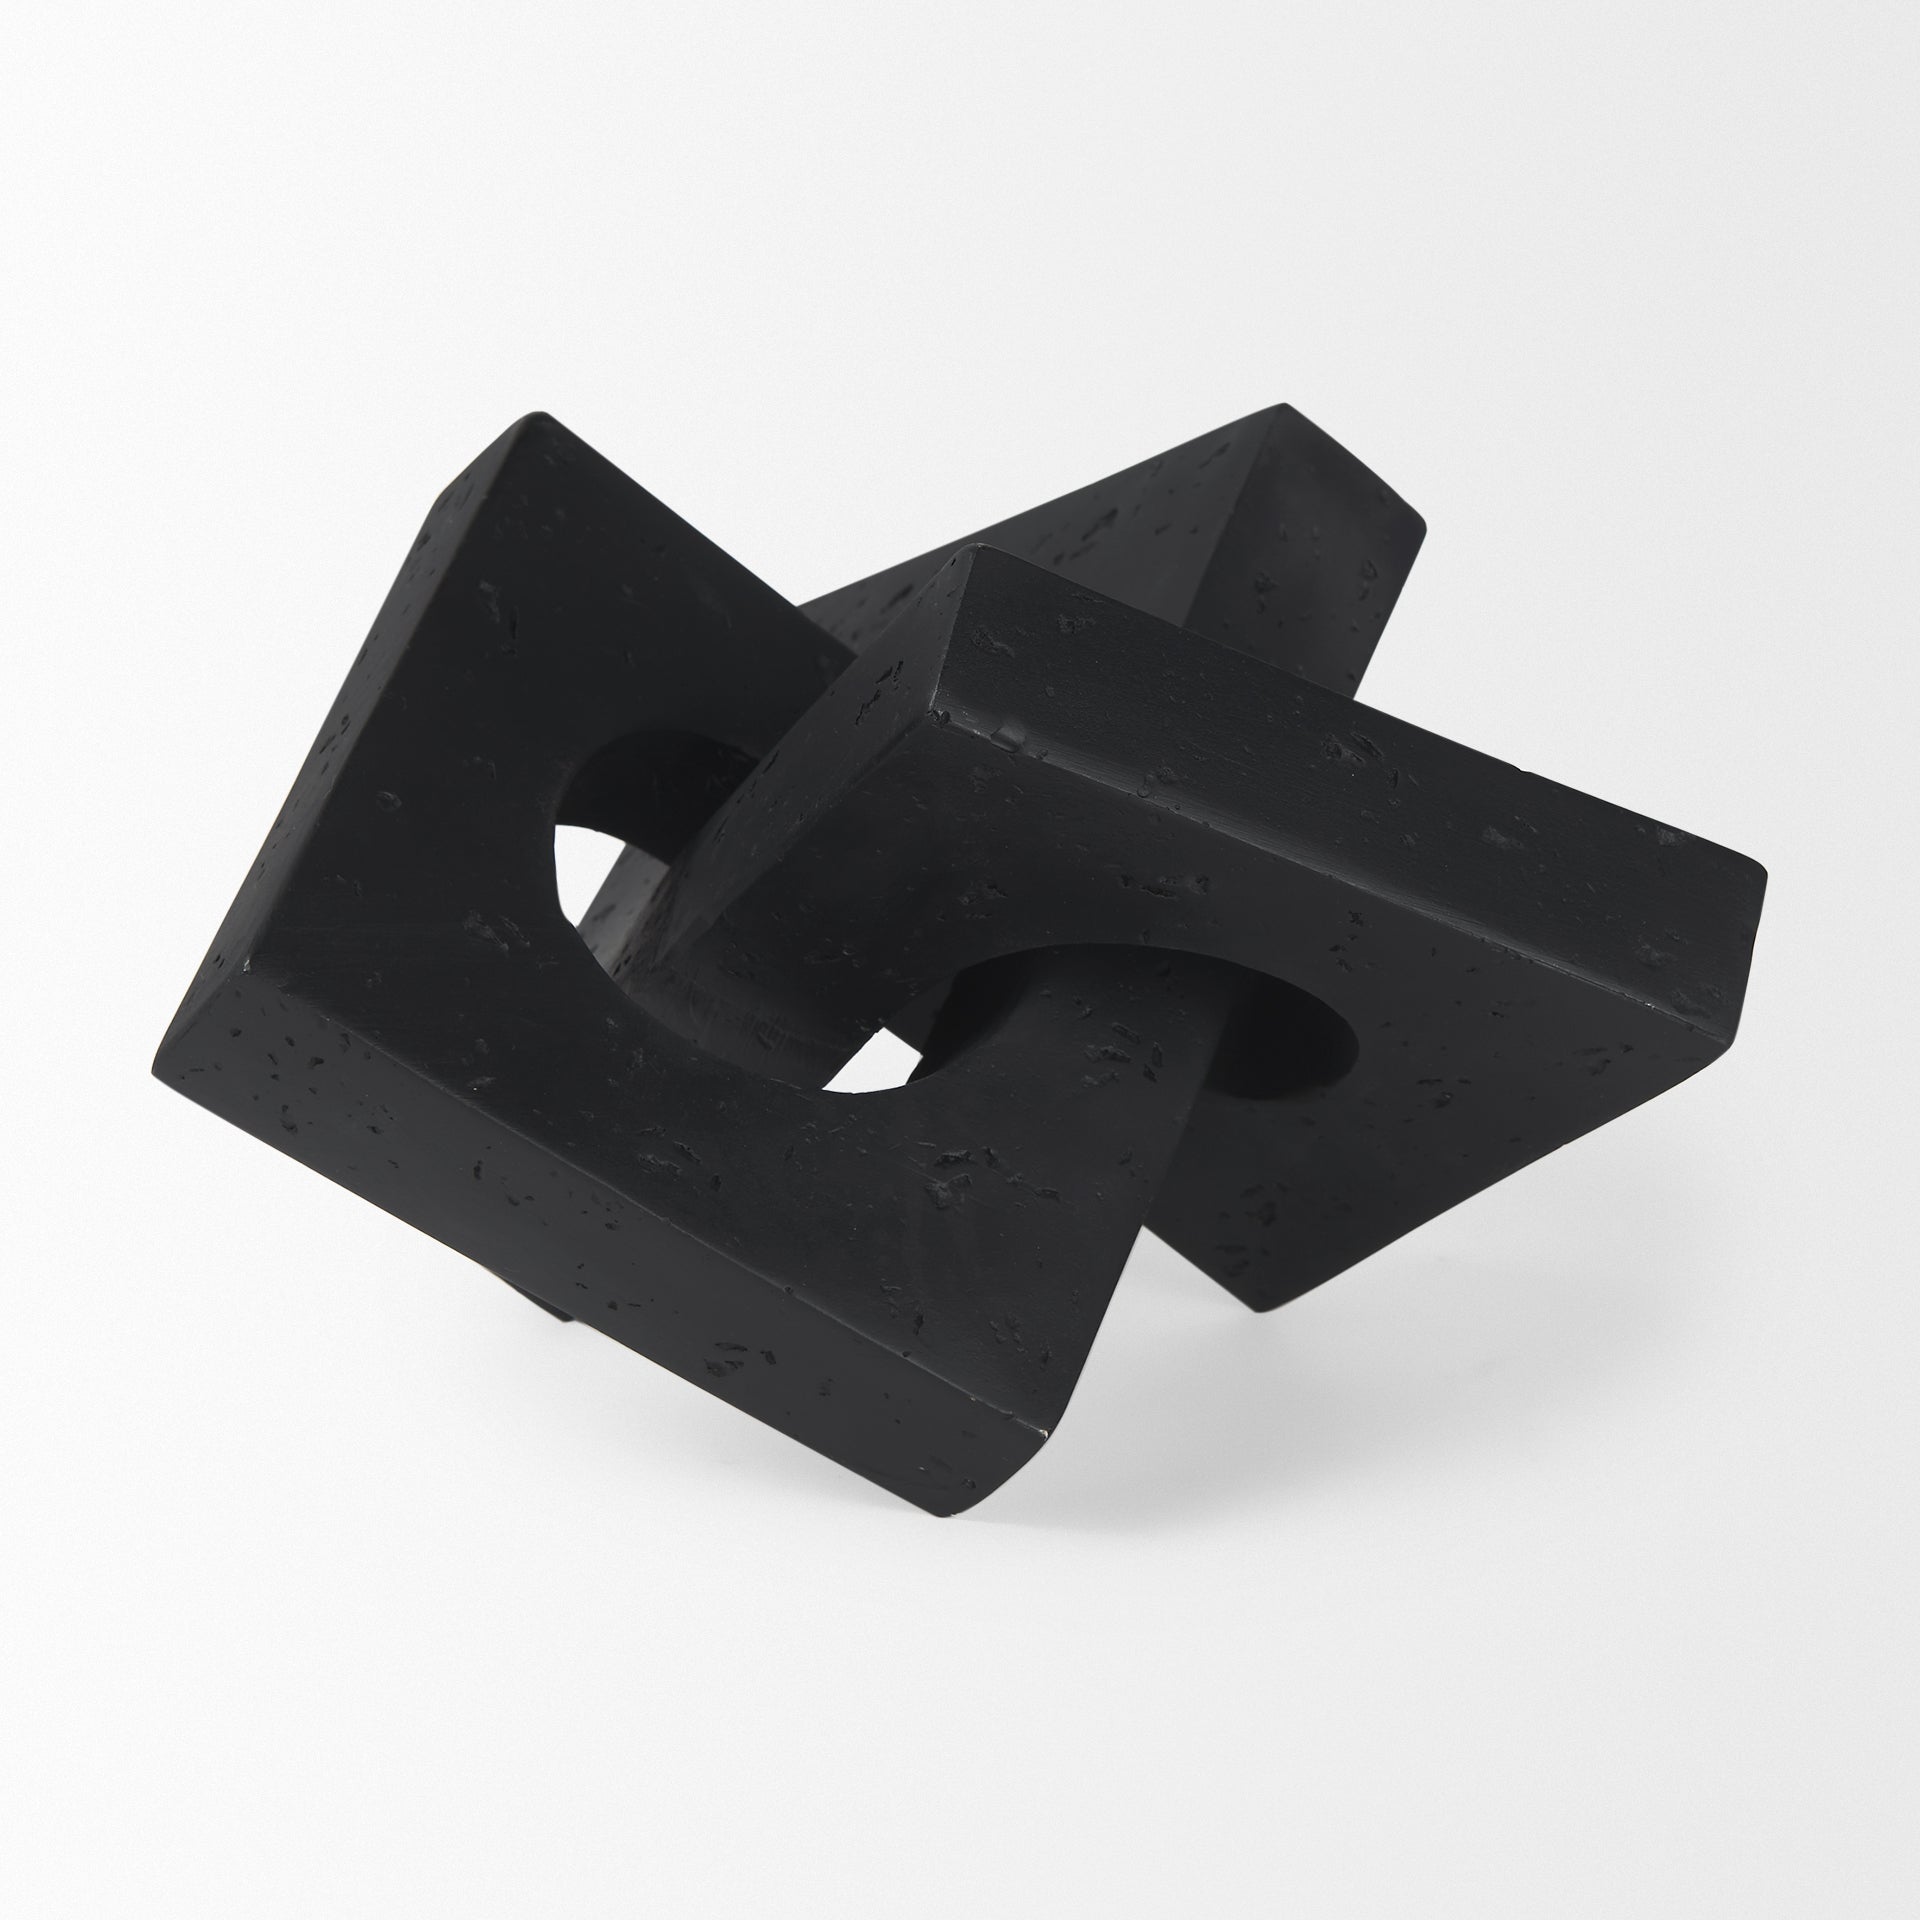 Linx Small Object- Black Resin